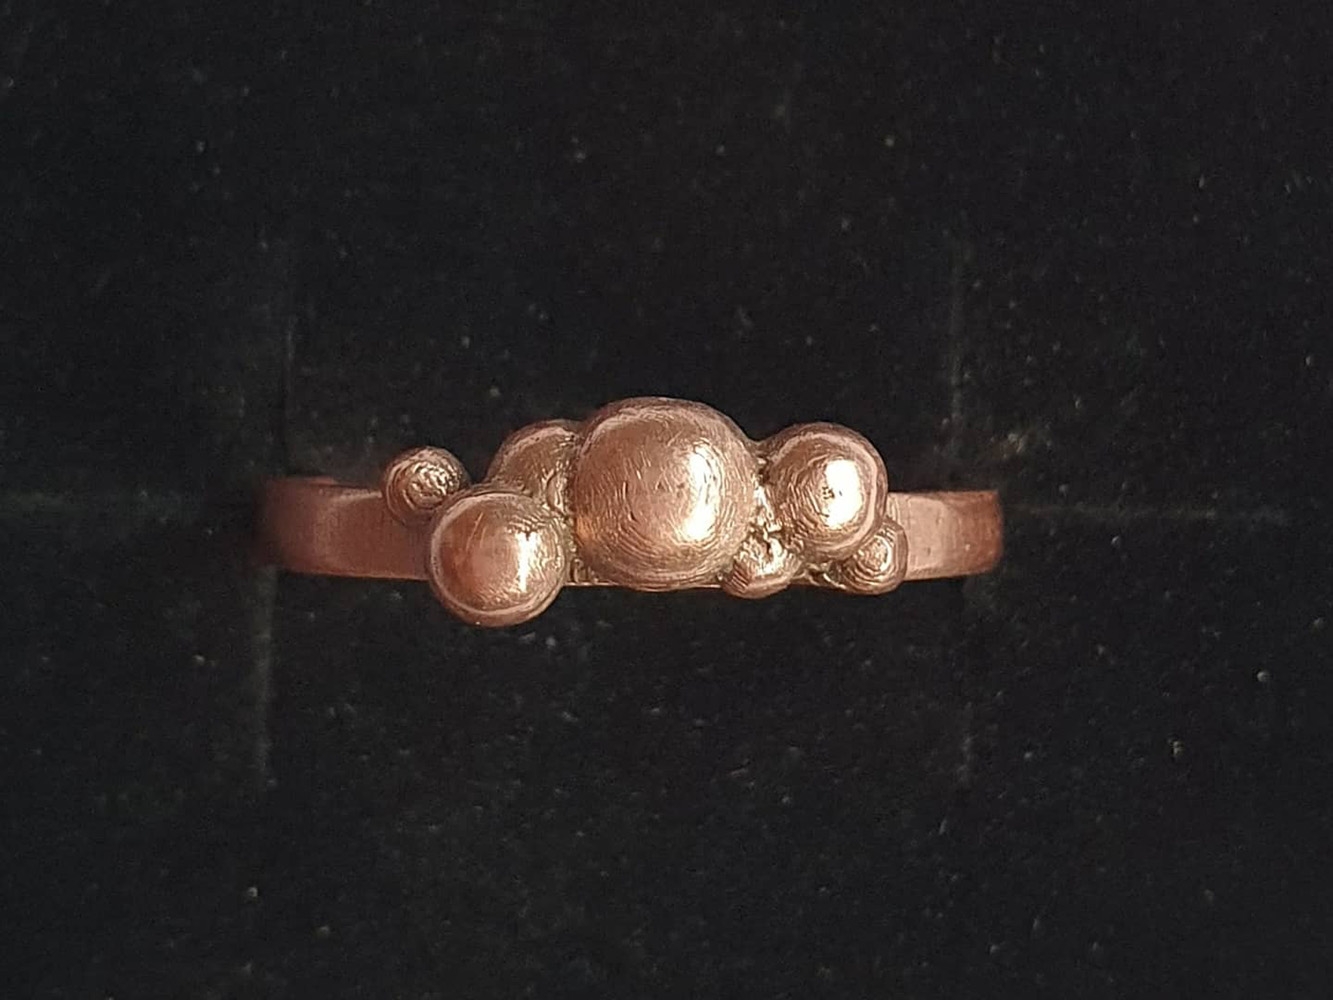 Copper ring with band and multiple spheres on top